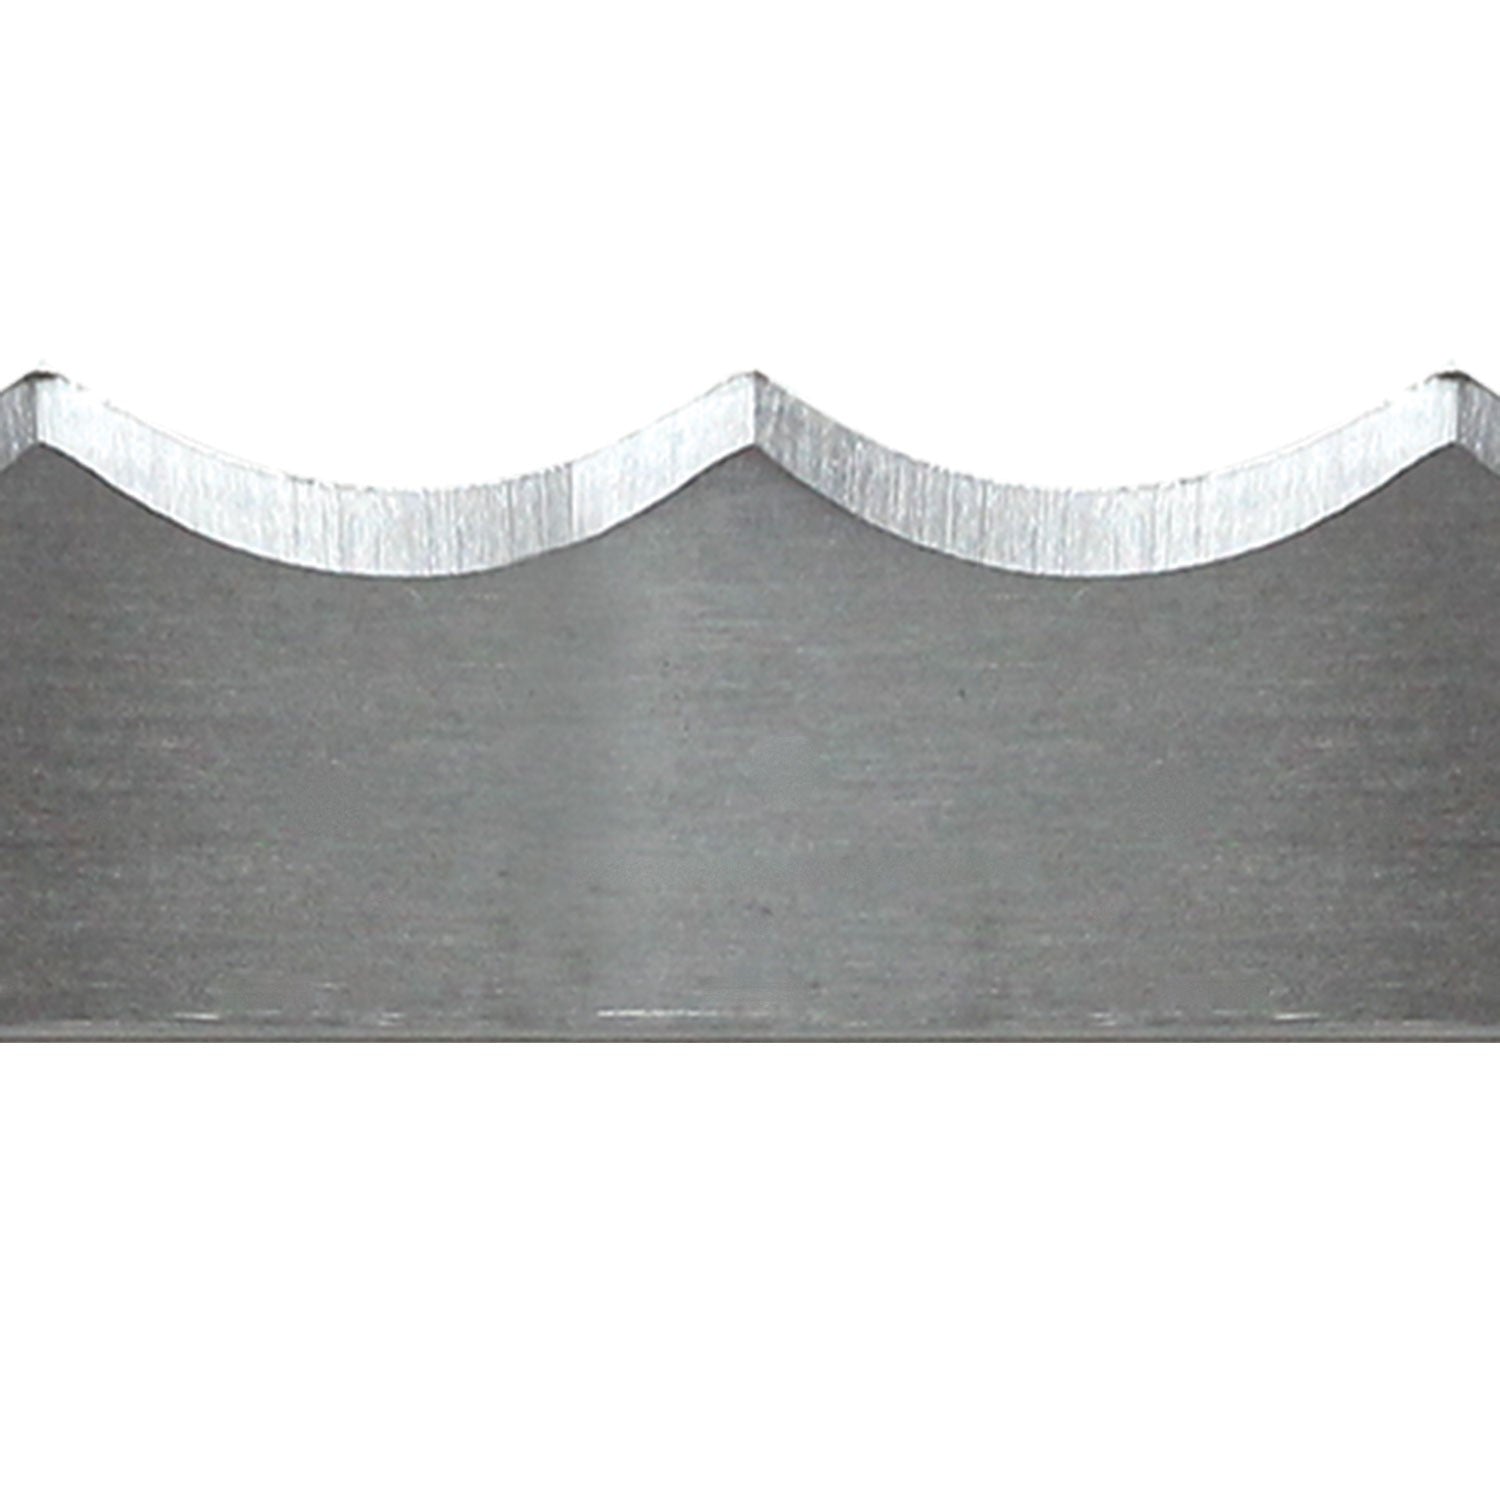 Meat Band Saw Blade - Scallop Edge - 112 in. x 5/8 in. x .022 in. - Pack of 4